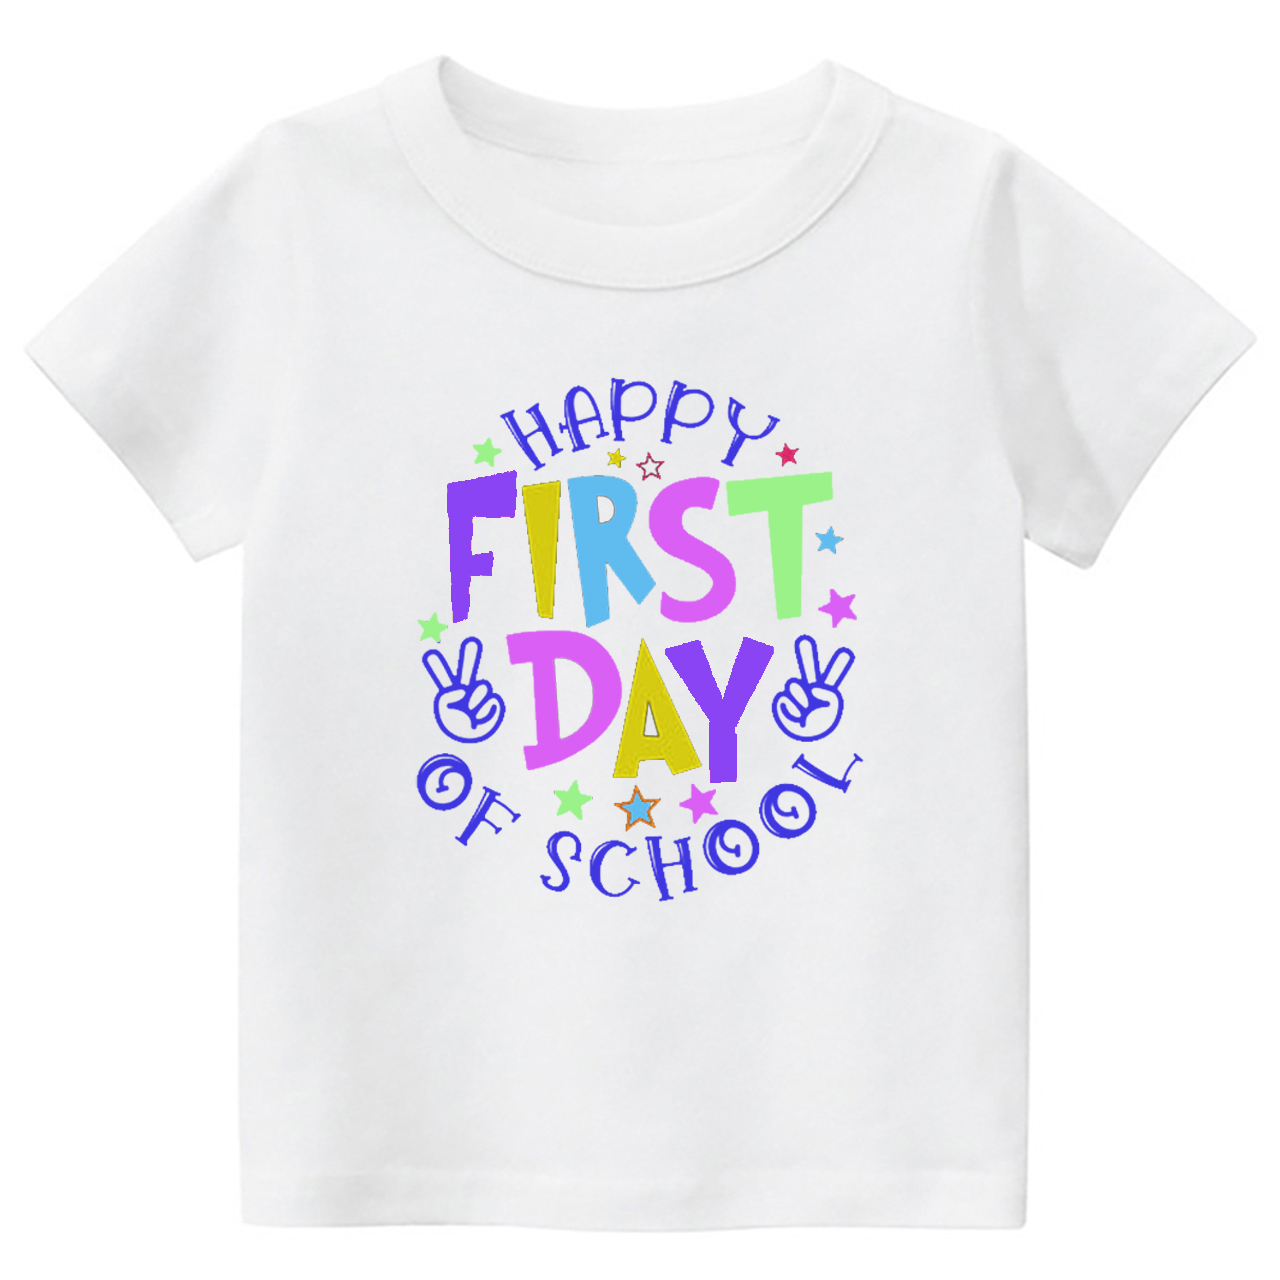 Yeah Happy First Day Of School Kids Shirts